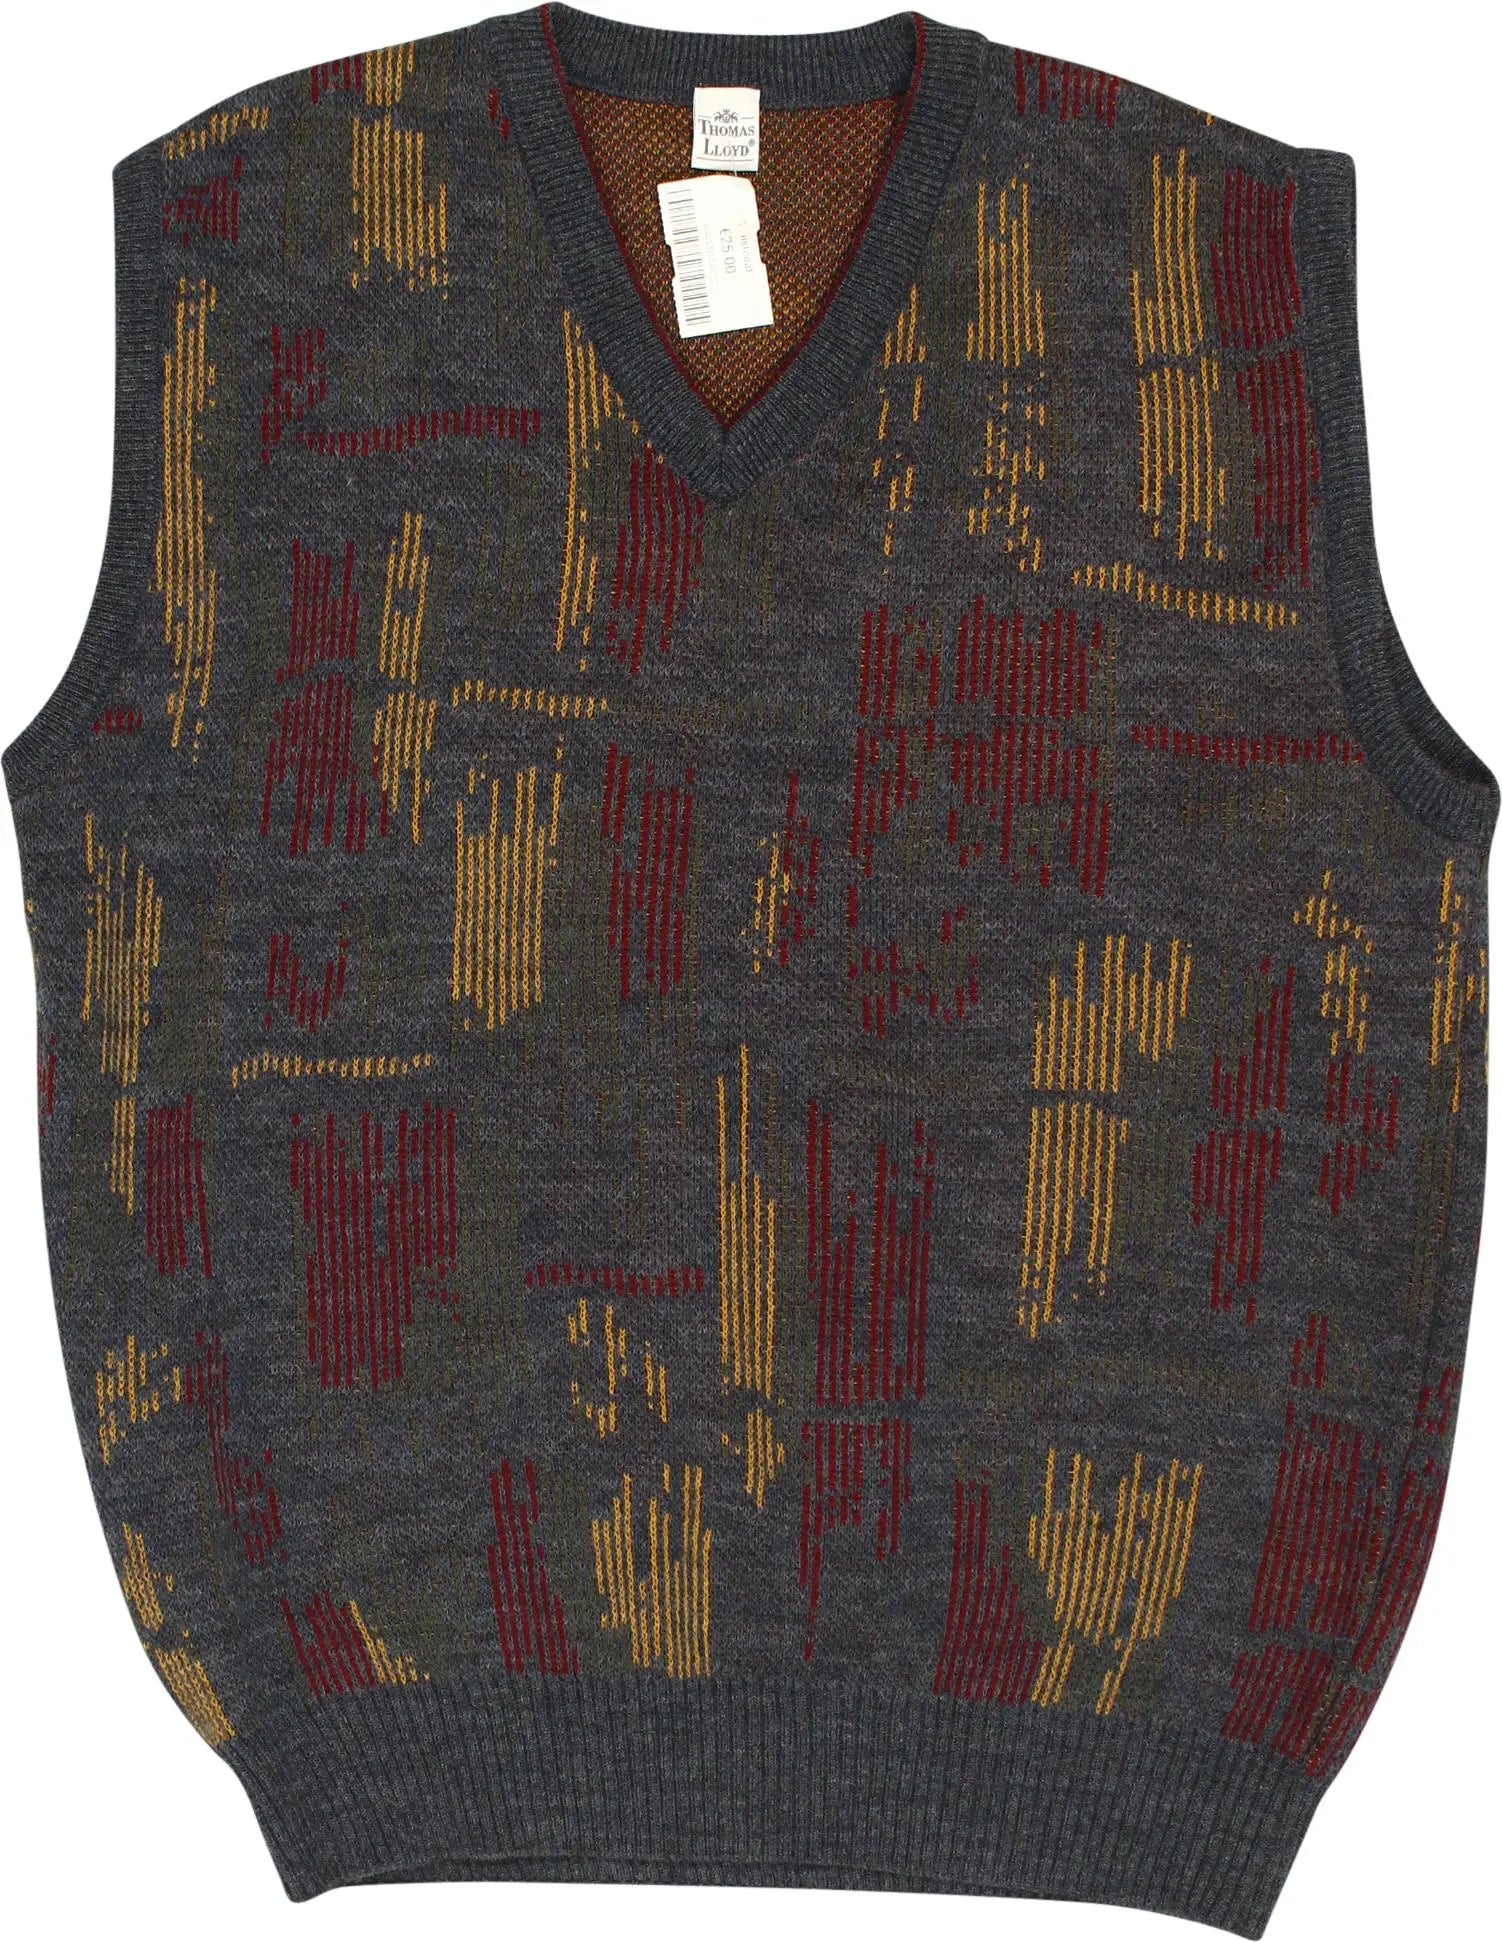 Thomas Lloyd - 90's Waistcoat- ThriftTale.com - Vintage and second handclothing